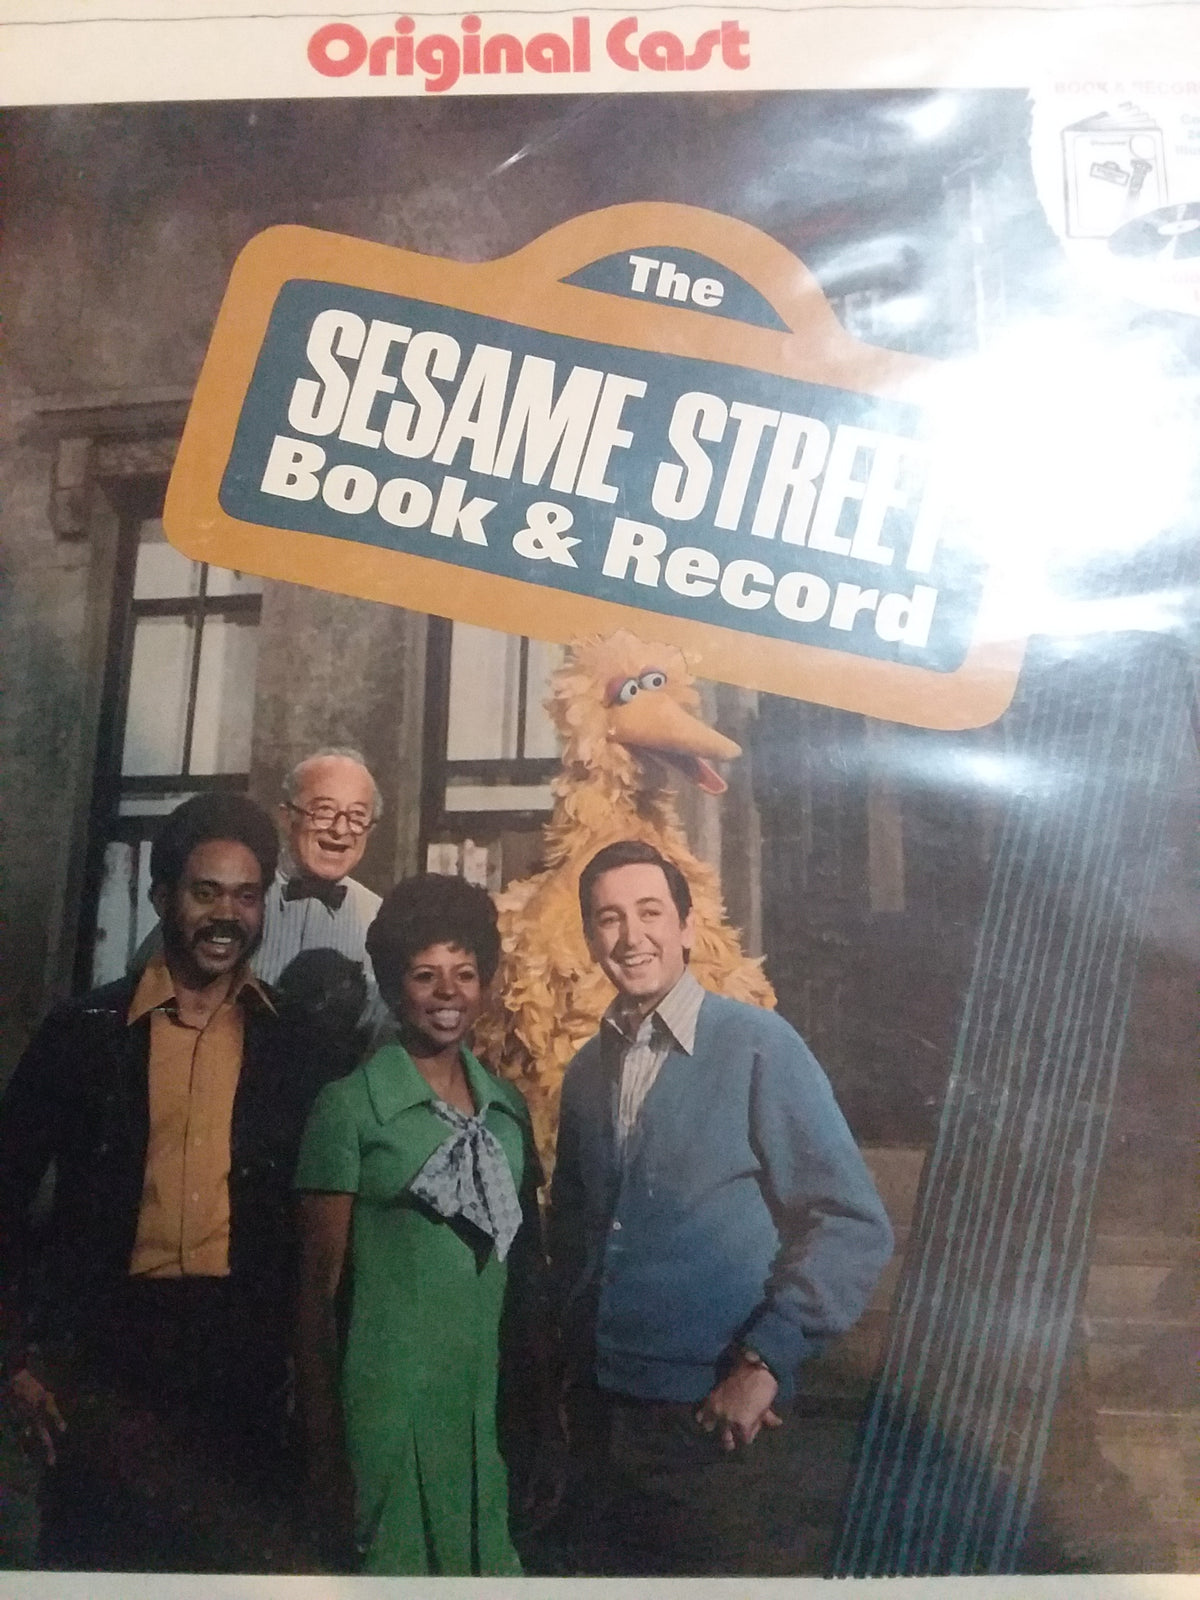 The Sesame Street Book and Record